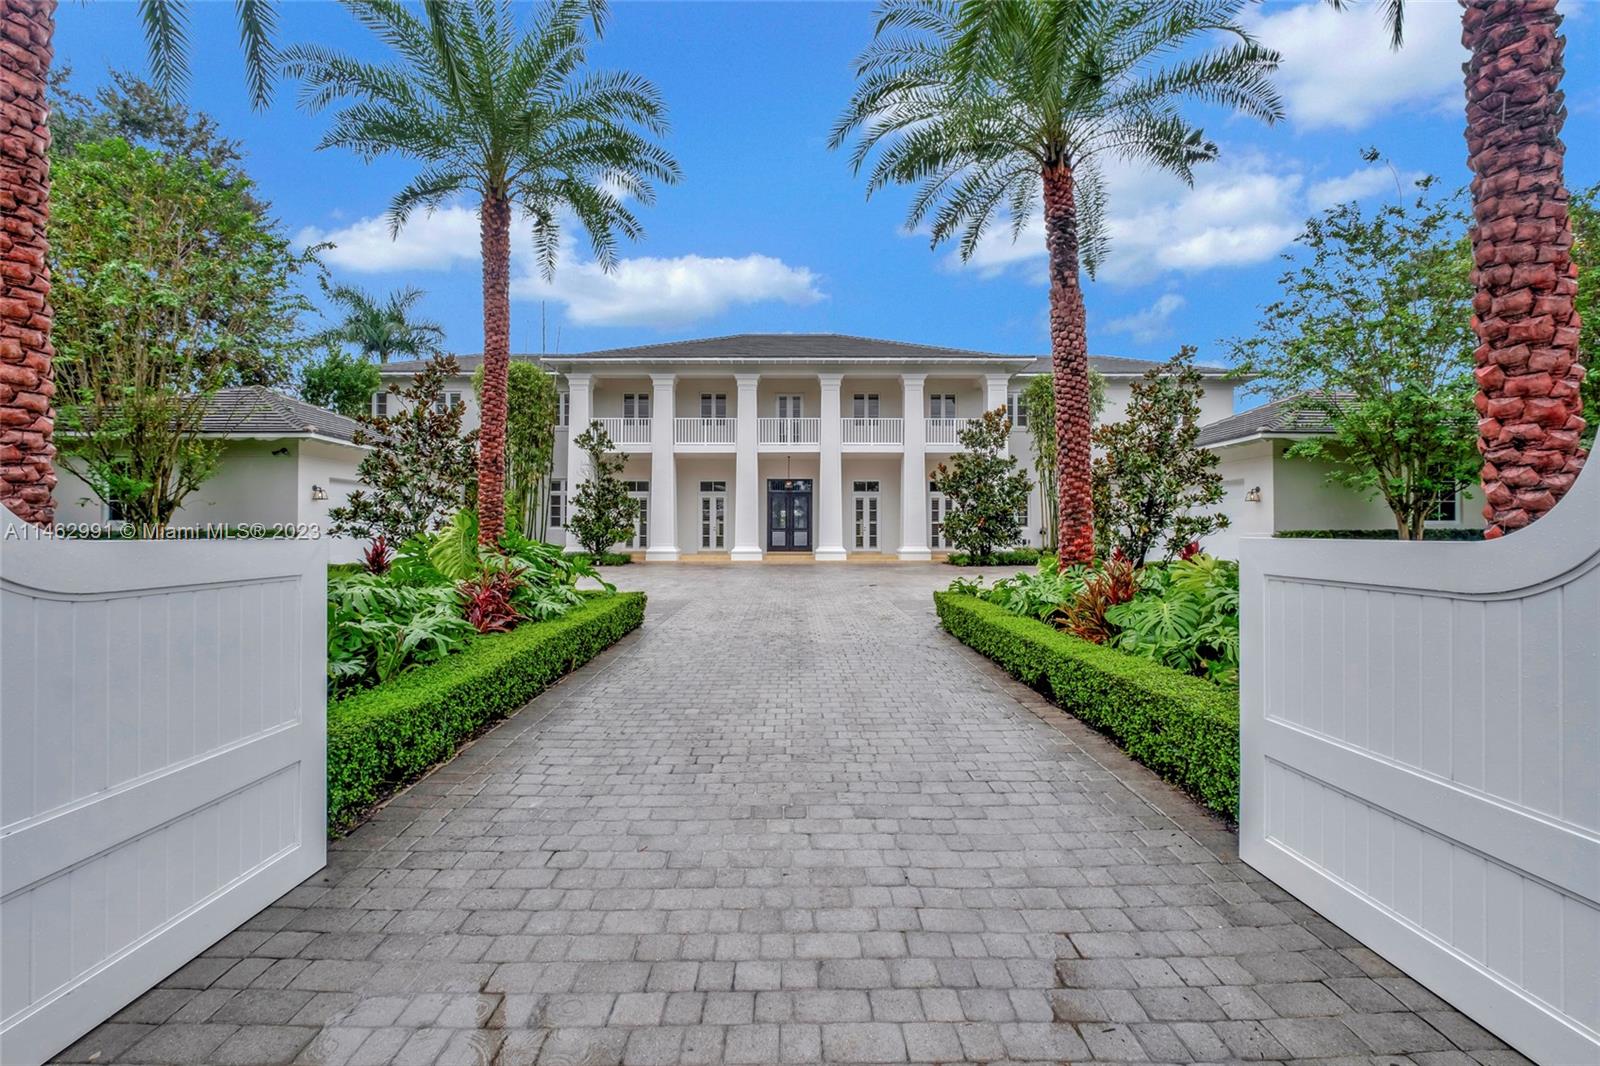 Elegant Colonial style estate was designed by renowned architect Cesar Molina. Located in the heart of the sought-after Ponce Davis neighborhood, this spectacular 2-story residence is surrounded by lush landscaping w/ Oak and Magnolia trees & tons of lightning. The amazing floor plan w/ 7 bedrooms, 8.5 bath features formal dining, living & family room overlooking gorgeous oversized pool. Limestone floor throughout & a 1/1 separate entry guest house w/ balcony. Spacious primary bedroom suite w/oversized closet, teak floors, his/hers bath & private balcony. Complete w/ an elevator, tiled 4-car garage, large pantry, butlers pantry, Wolf appl & more. Control 4 home automation, security system & gated entrance w/ tons of privacy. Steps away from world class schools, dining & shopping.